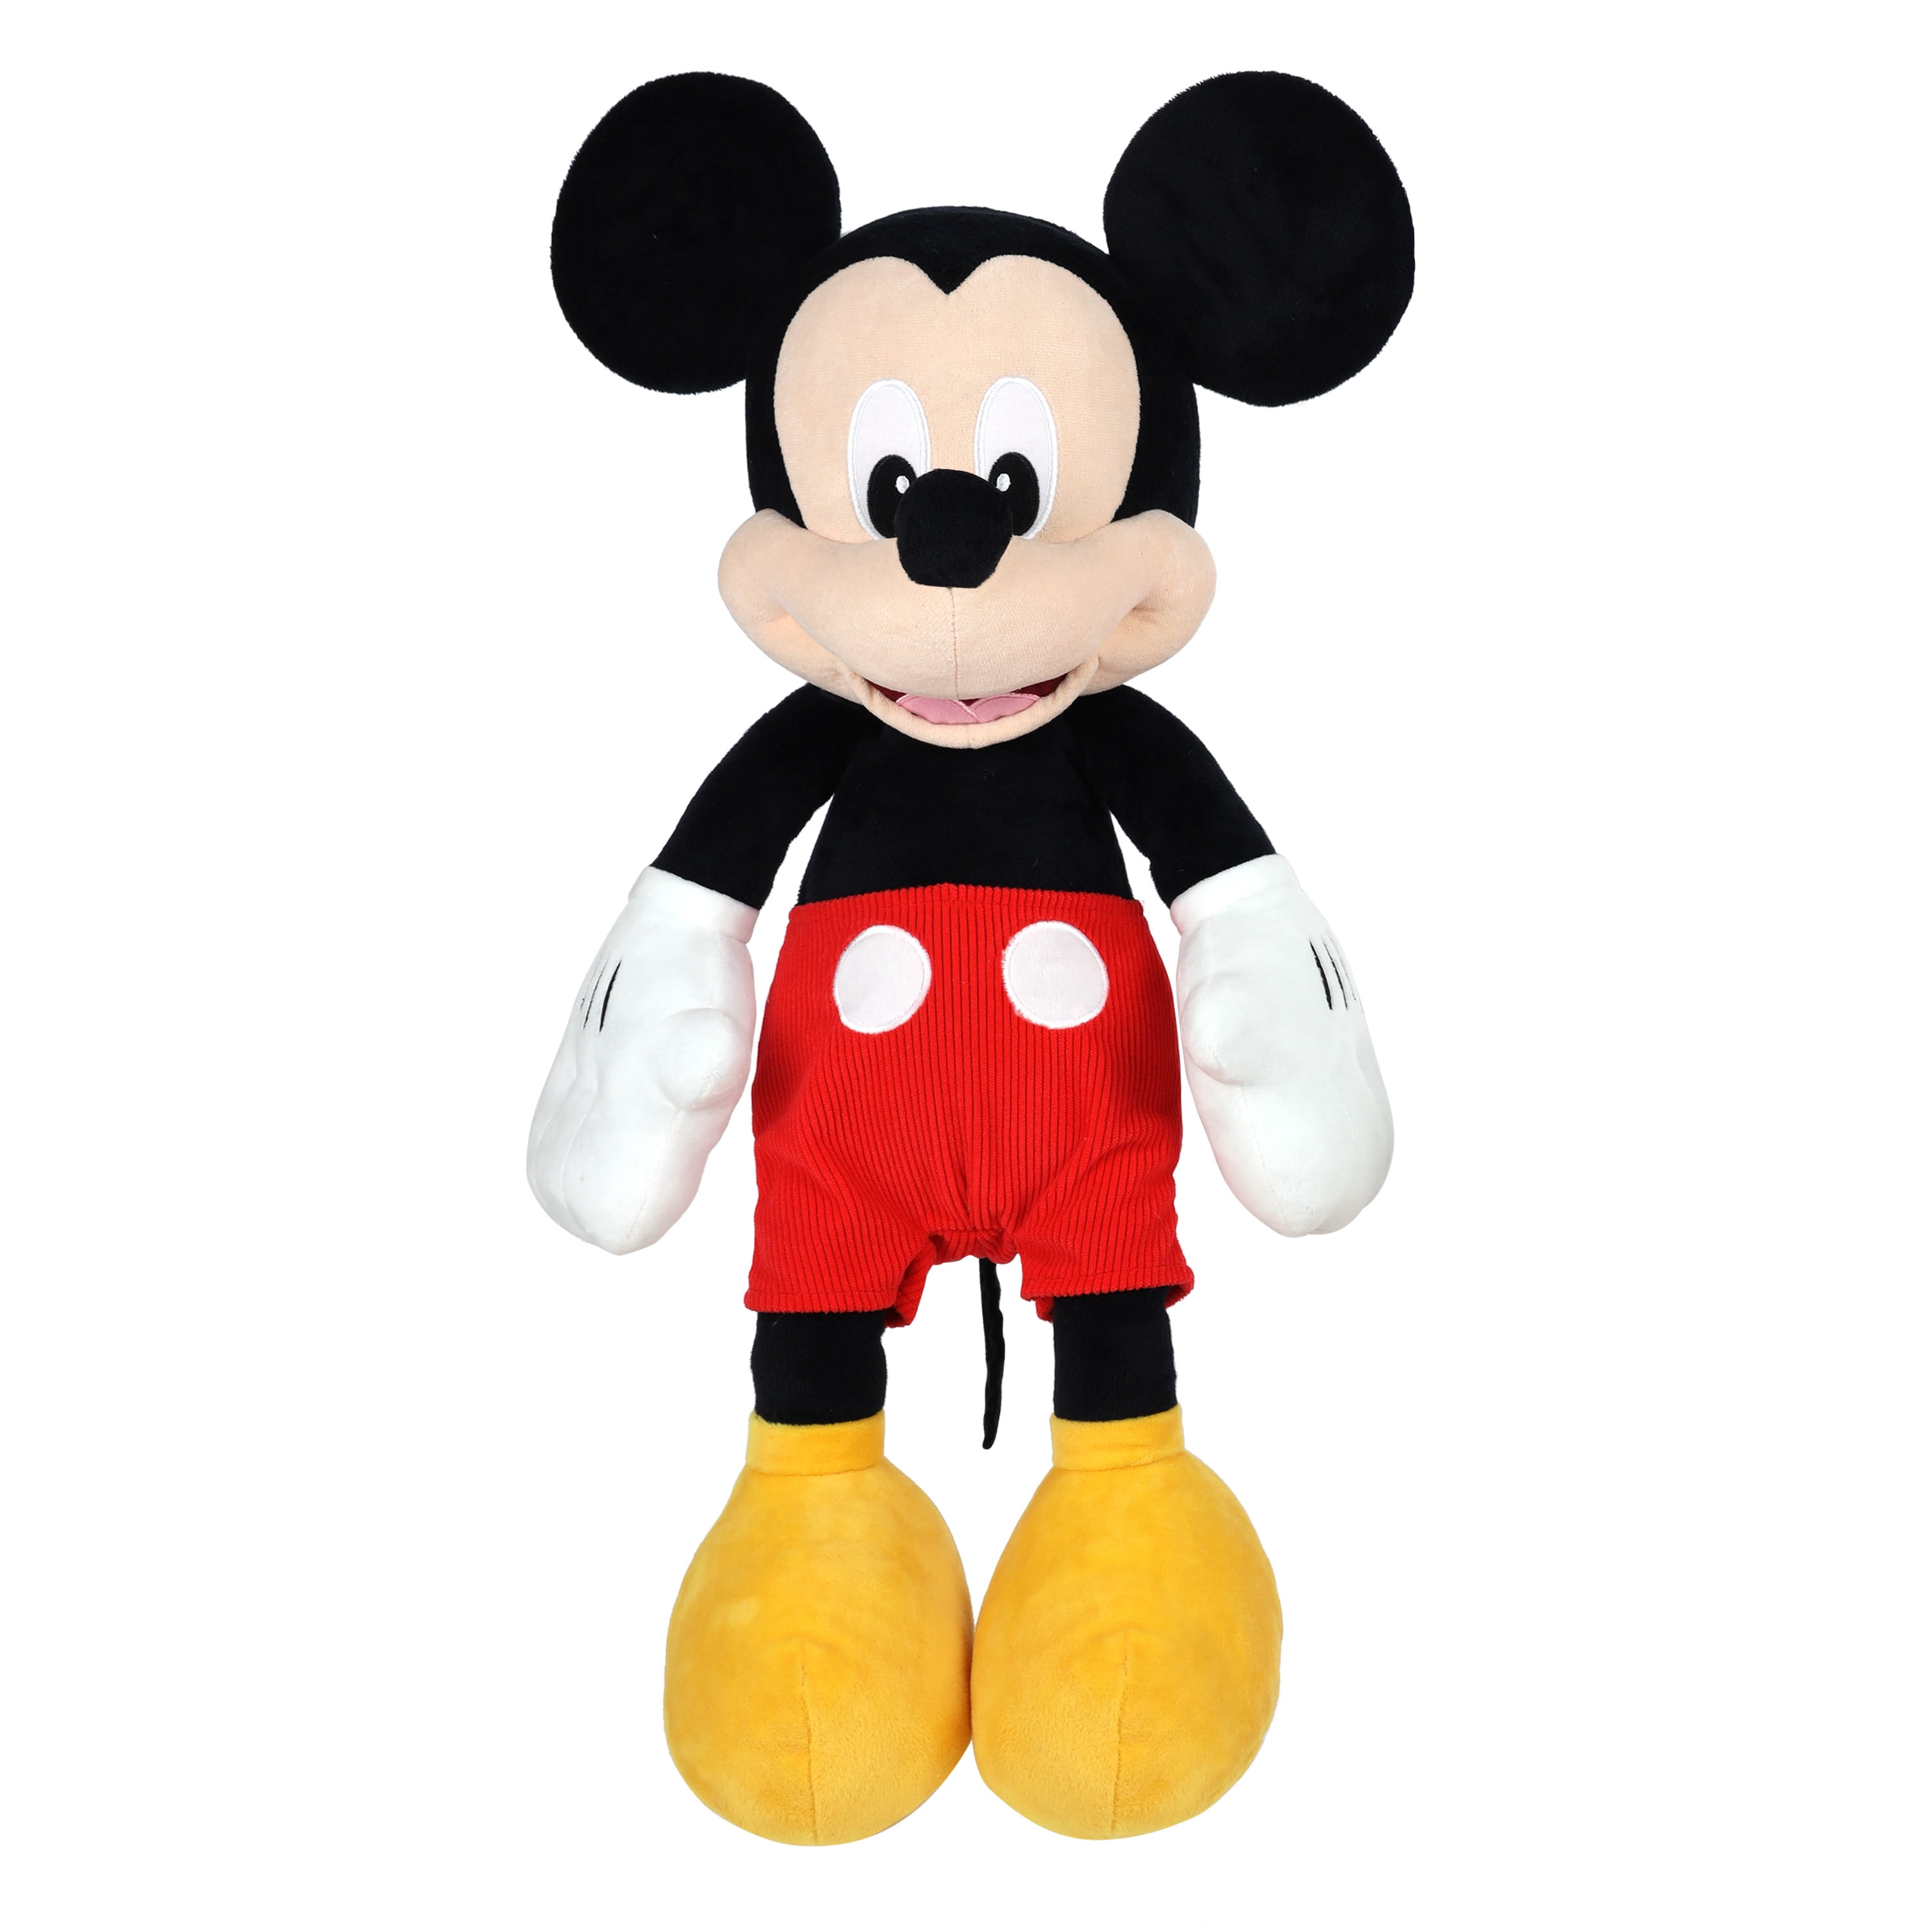 Just Disney Junior Mickey Mouse Jumbo 25-inch Mickey Mouse, Preschool Ages up - Walmart.com